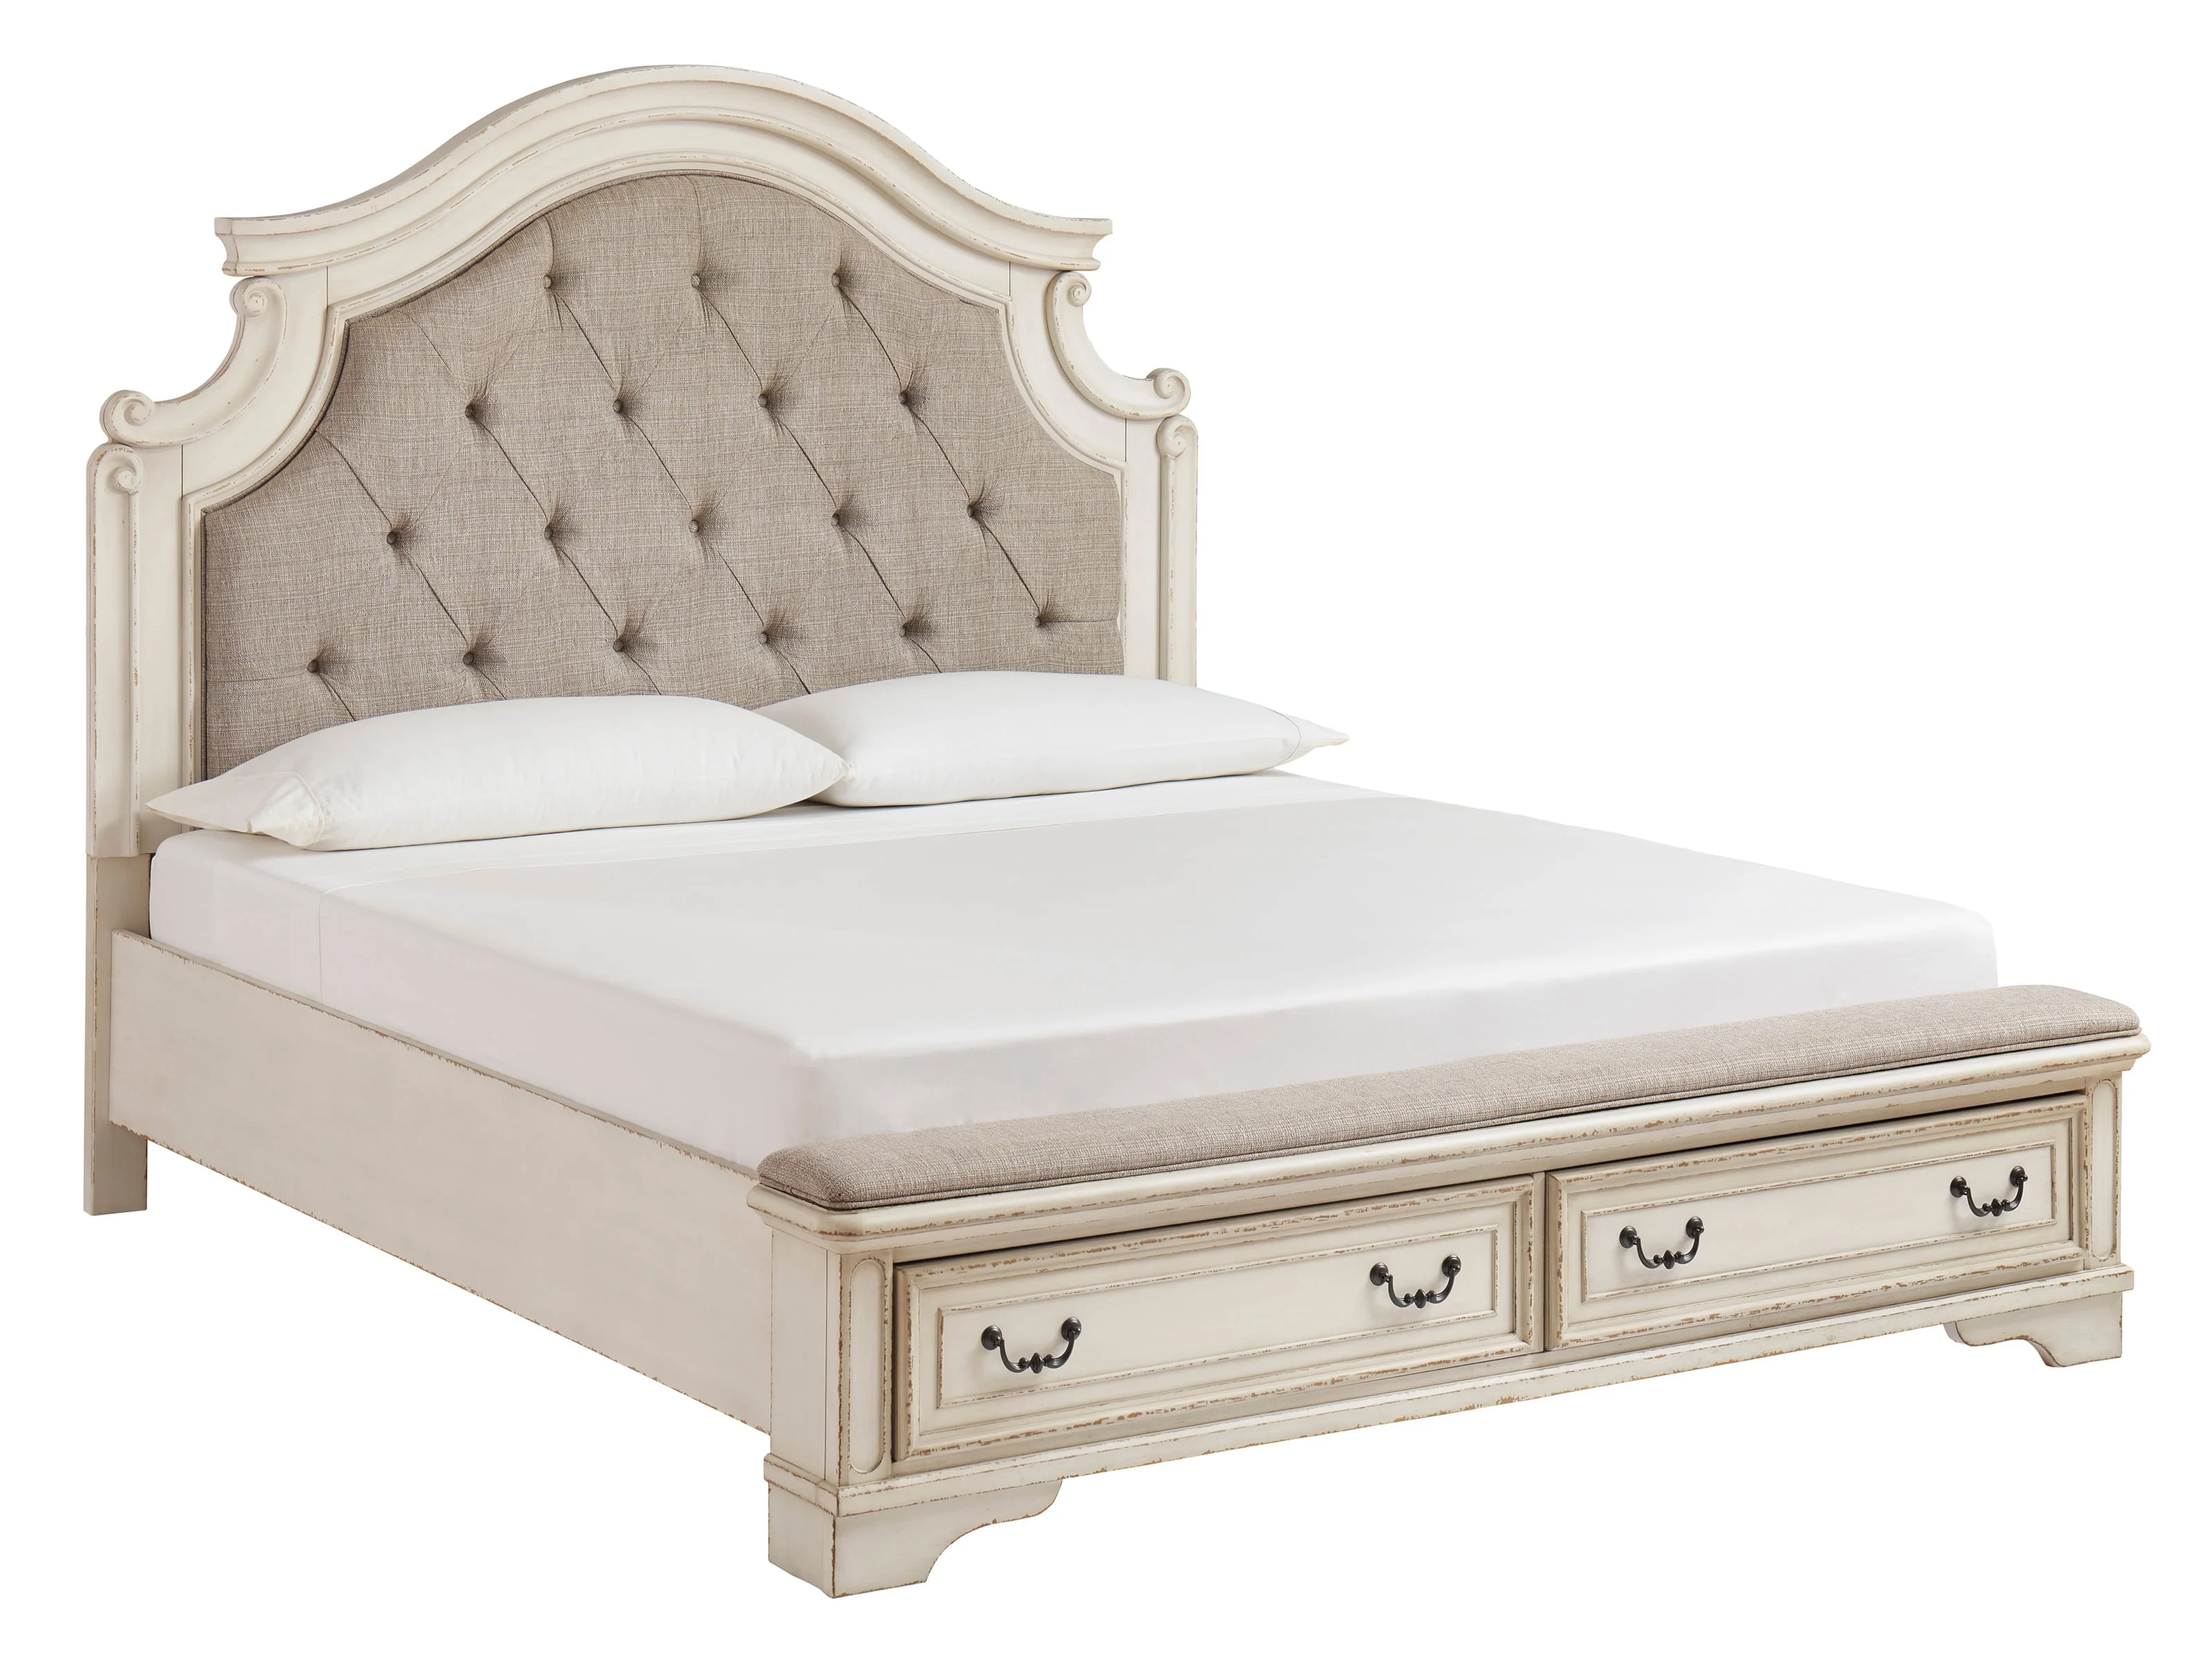 Signature Design by Ashley Realyn B743B18 Queen Upholstered Storage Bed, Furniture and ApplianceMart